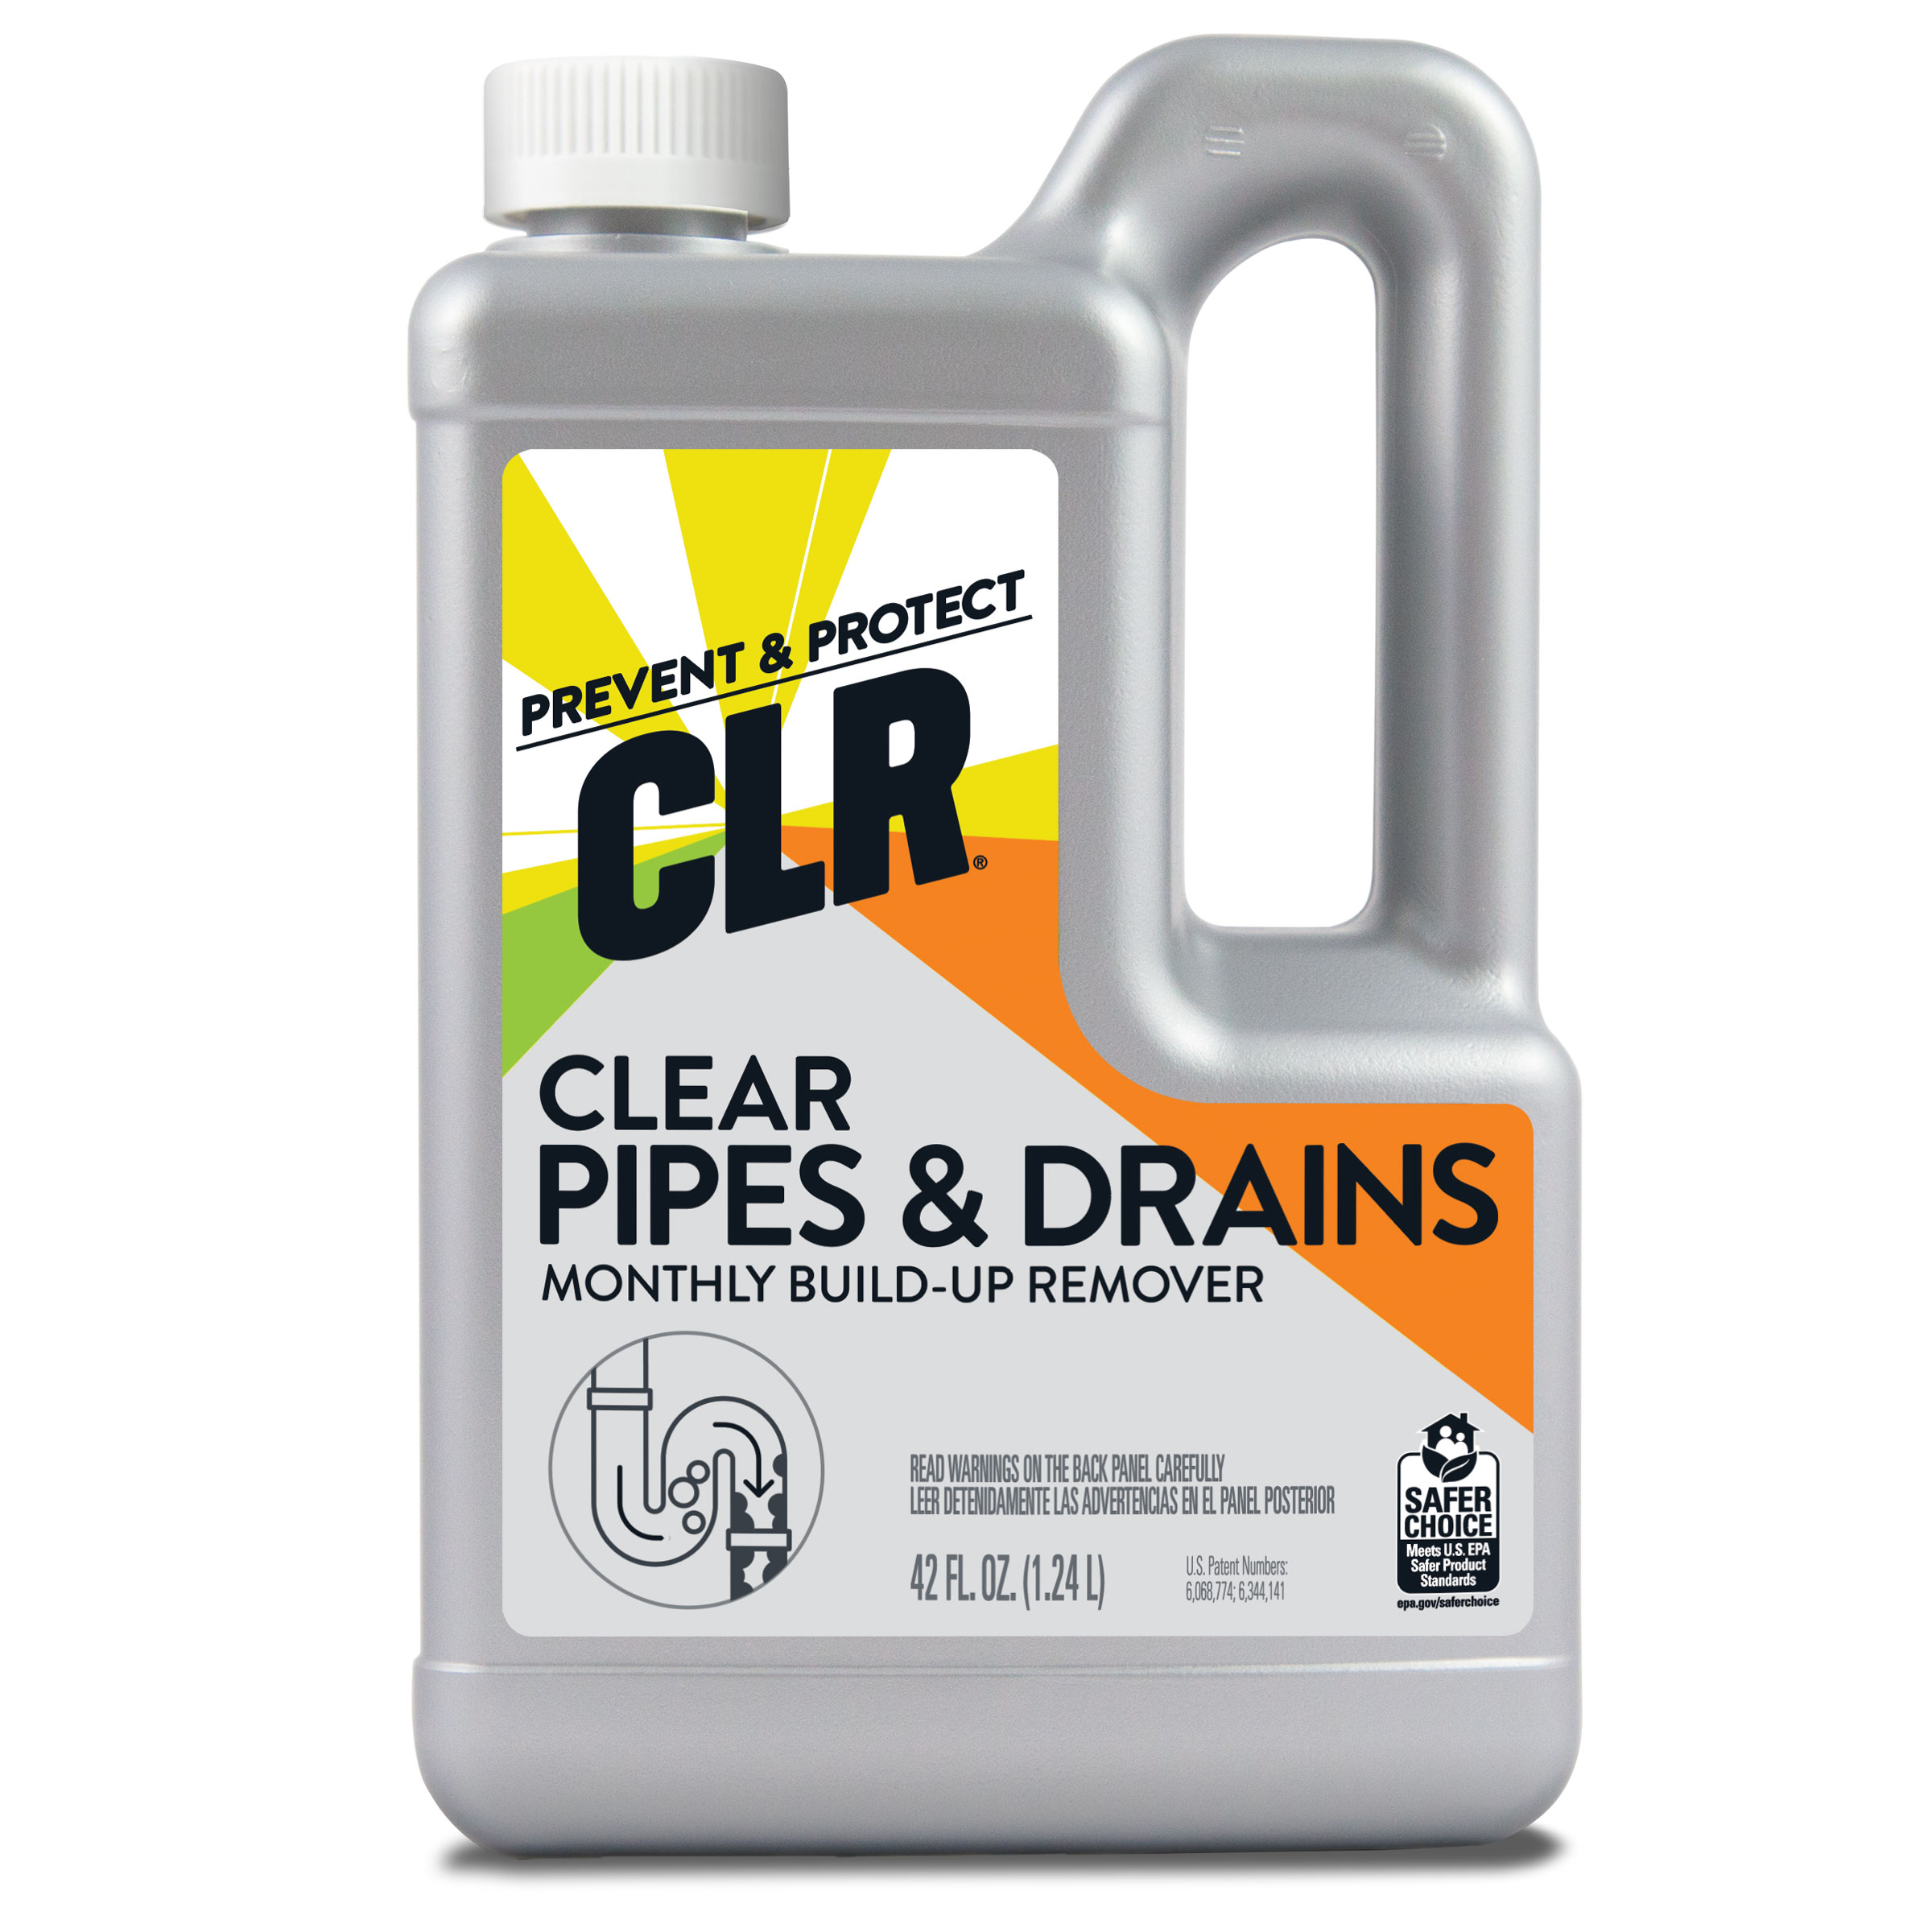 CLR Clear Pipes and Drains, Monthly Build-up Drain Cleaner, EPA Safer Choice, 42 fl oz Bottle - image 1 of 8